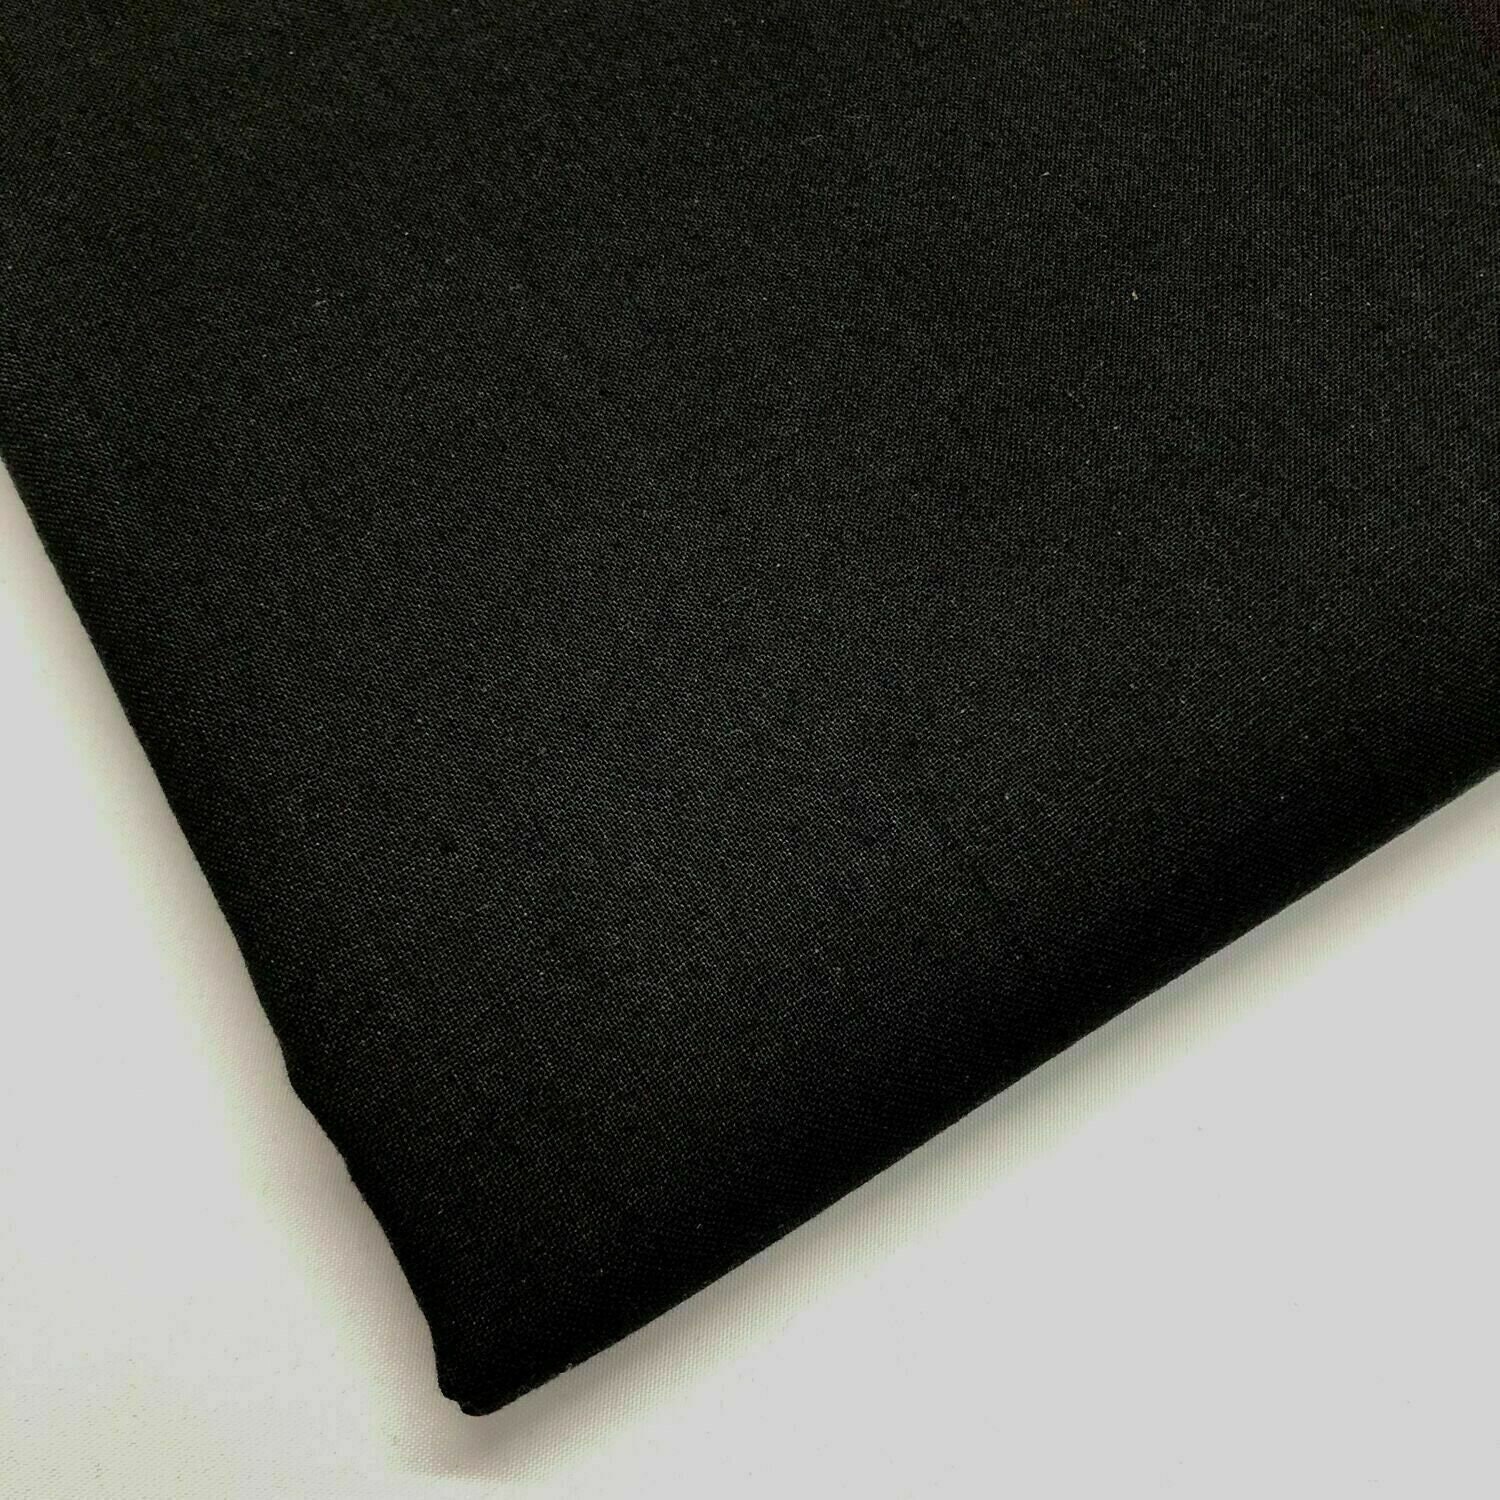 100% Cotton Black Fabric Plain Material for Crafts Clothing Summer Fashion,  Fabric by the Metre 155cm Width in 0.5m Lengths -  Norway